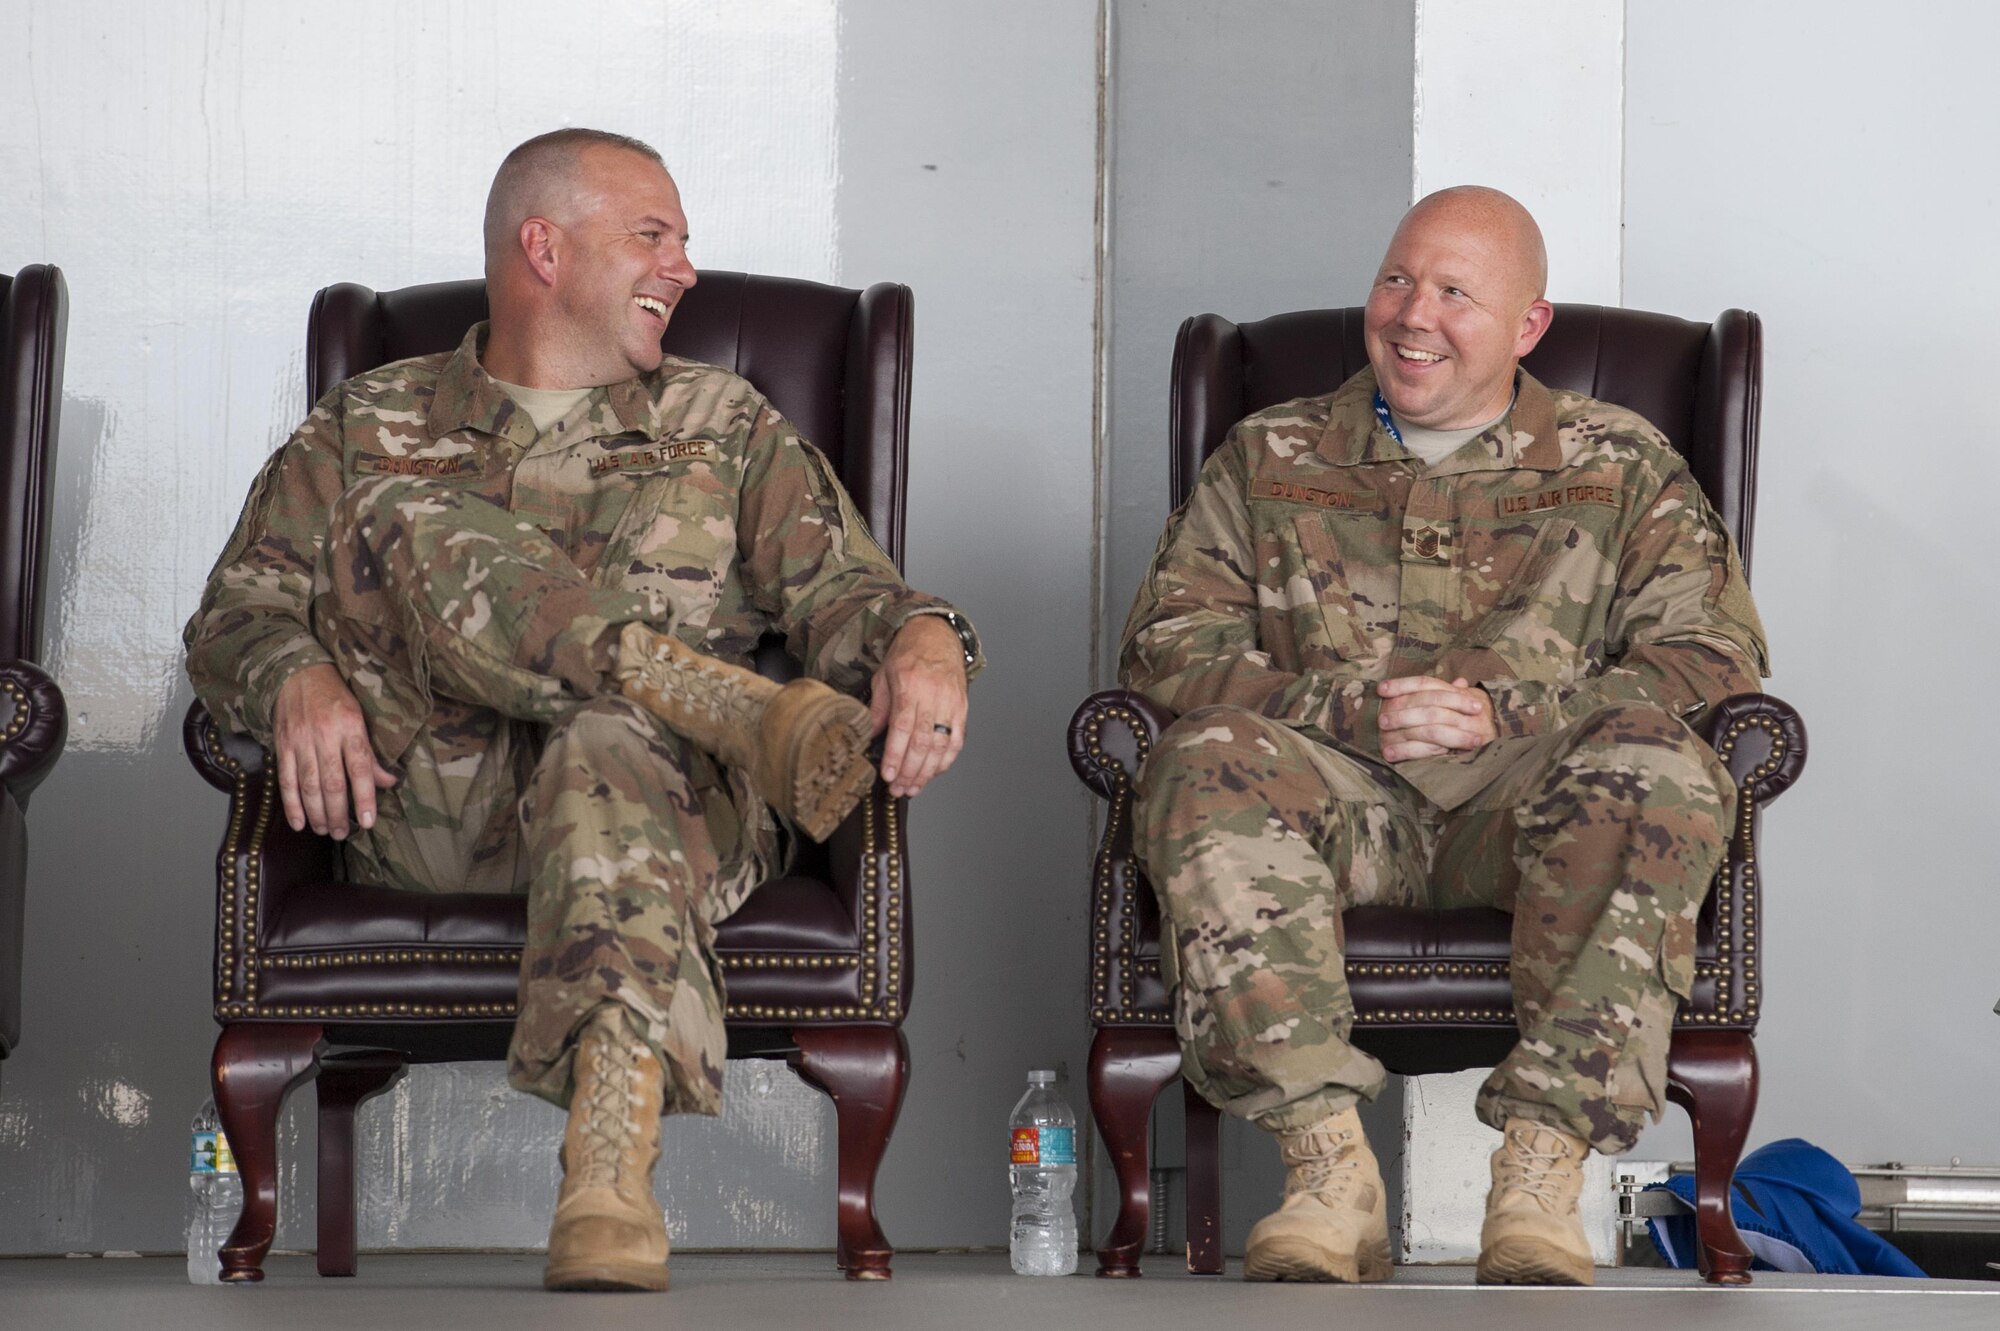 Then Maj. Christopher Dunston, 723d Aircraft Maintenance Squadron commander, left, and then Senior Master Sgt. Brandon Dunston, 74th Aircraft Maintenance Unit superintendent, laugh during a promotion ceremony, June 28, 2017, at Moody Air Force Base, Ga. During the ceremony, Chris promoted to lieutenant colonel and his younger cousin, Brandon, promoted to chief master sergeant. According to Brandon, the pair has been waiting more than 19 years since his day of enlistment to be stationed together. (U.S. Air Force photo by Airman 1st Class Lauren M. Sprunk)